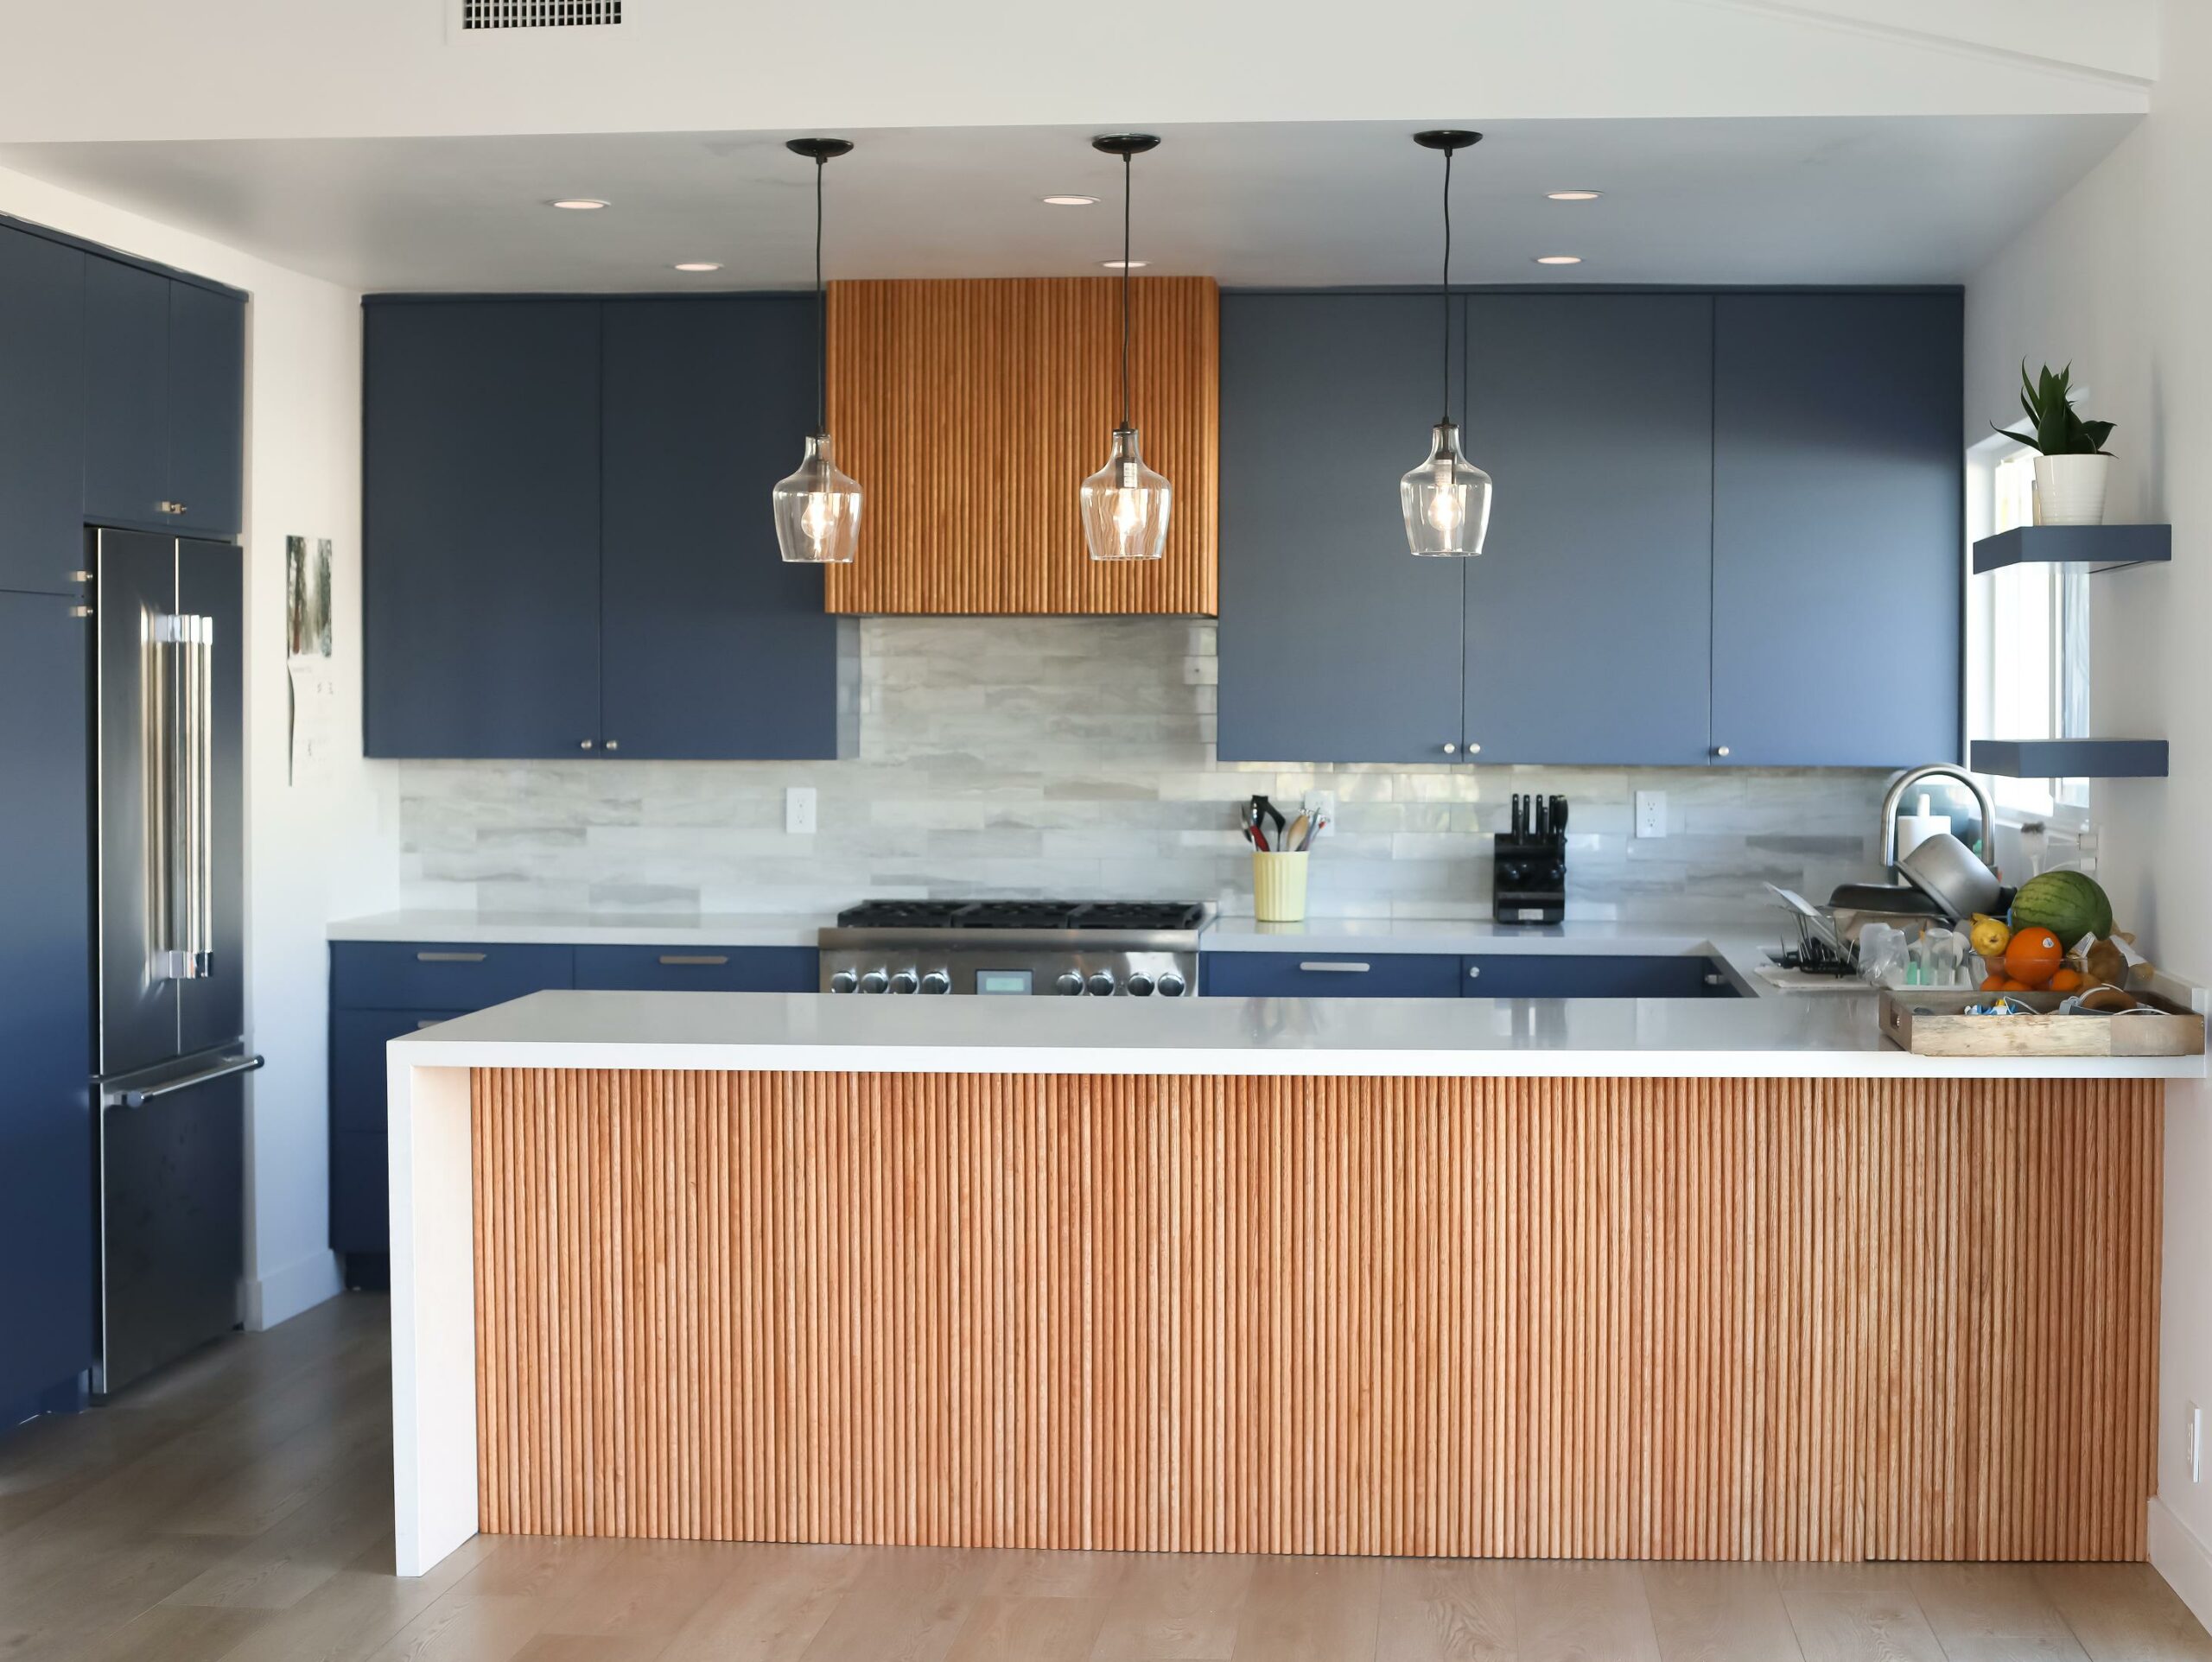 Modern kitchen interior with blue cabinets and pendant lights